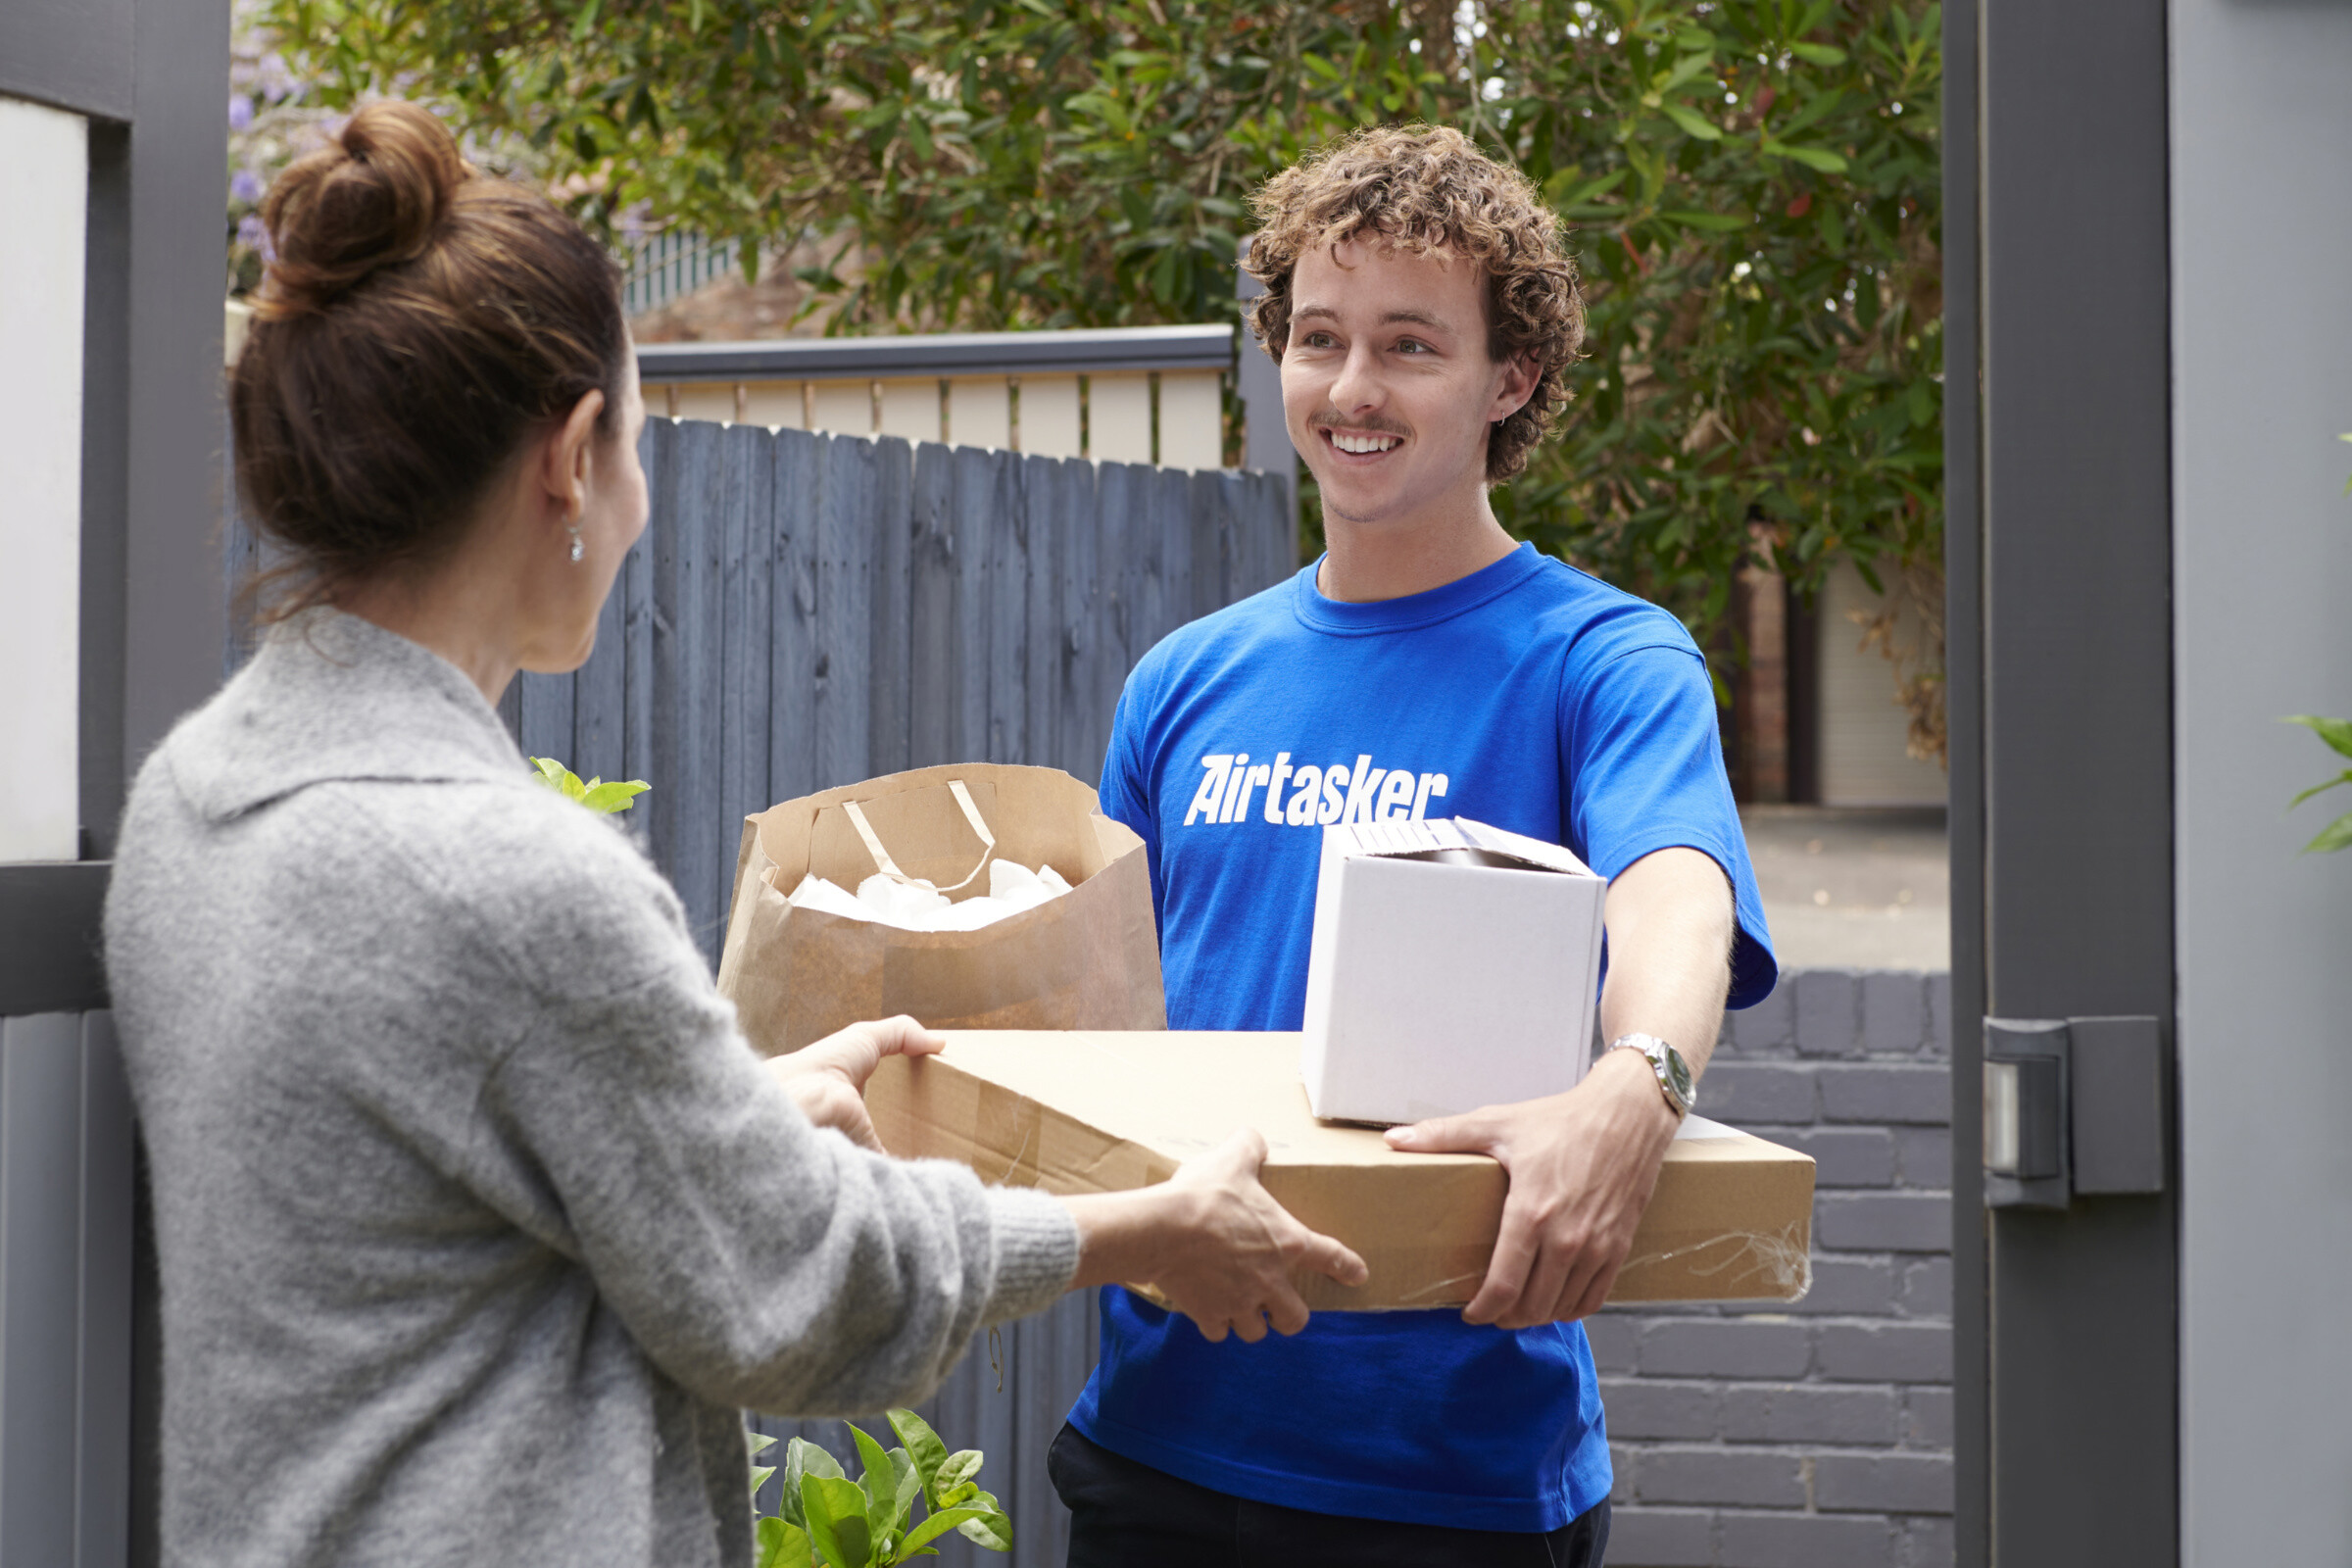 A large parcel being delivered by a courier, with the courier holding the package and walking towards a house.